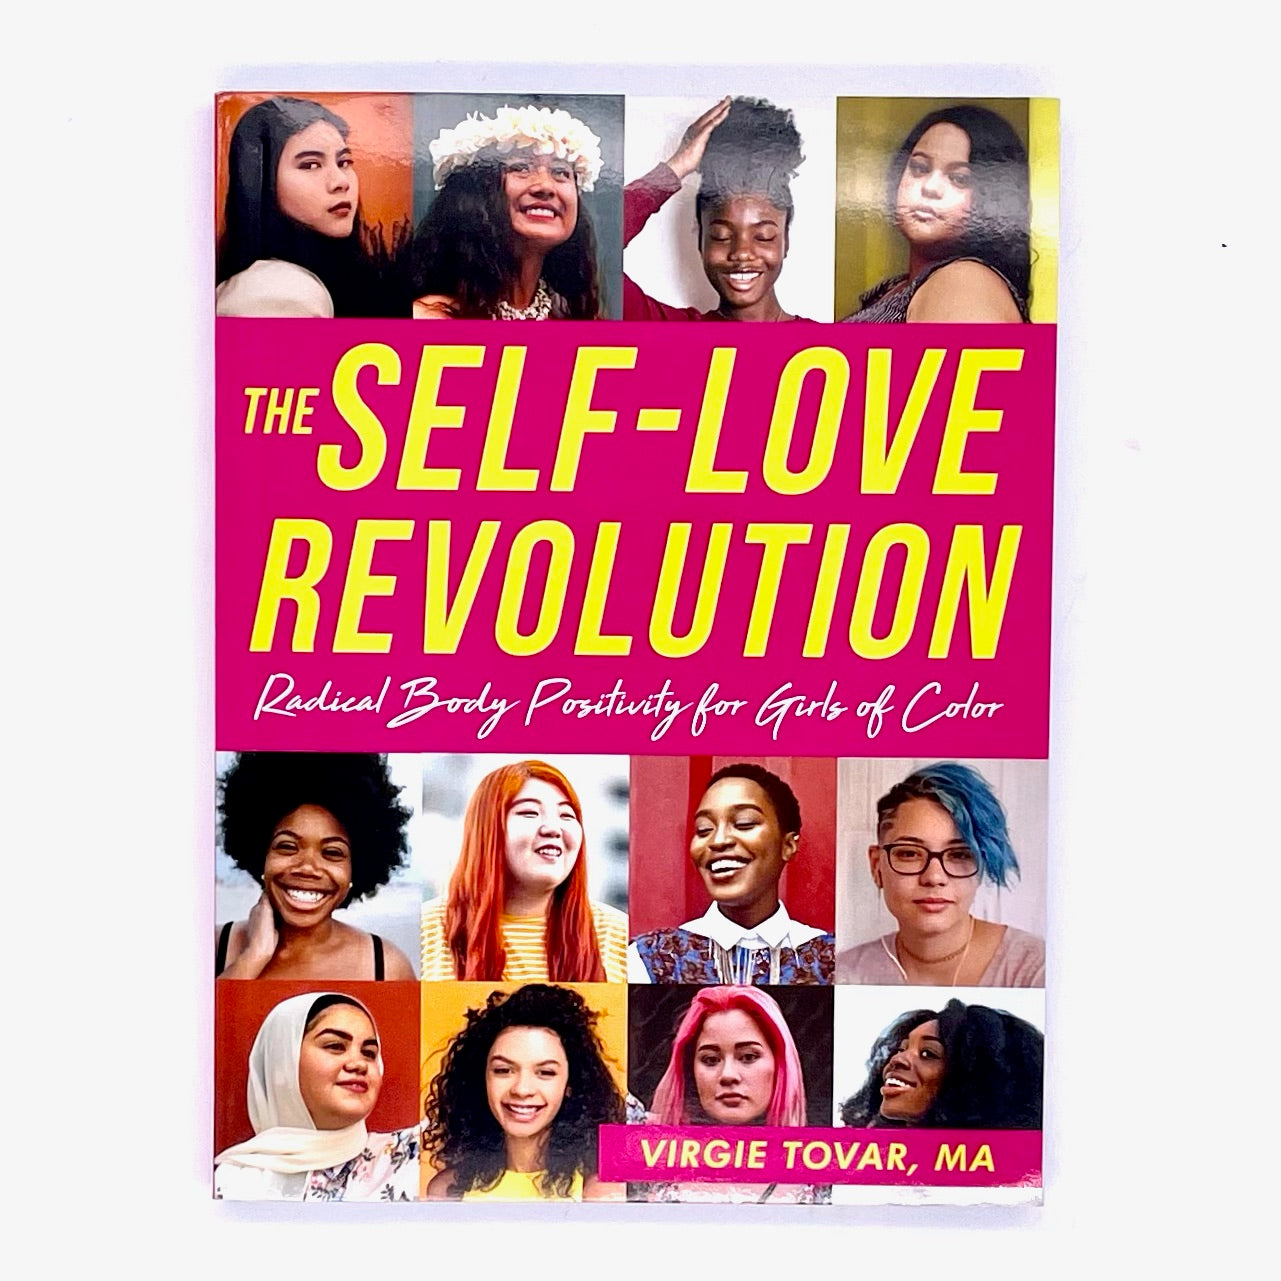 Book cover of The Self-Love Revolution, radical body positivity for girls of color by Virgie Tovar.